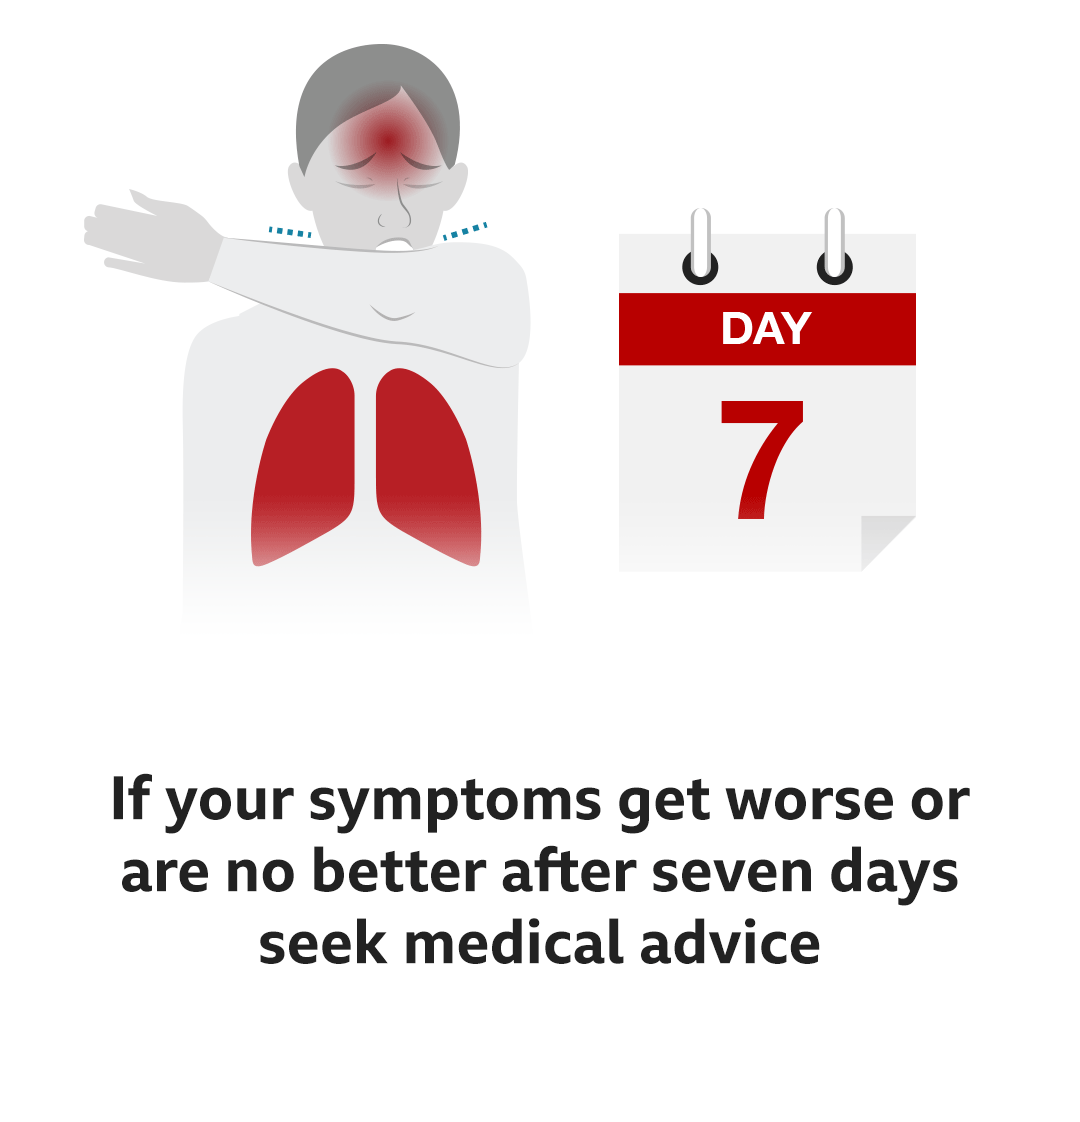 Text reads: If your symptoms get worse or are no better after seven days seek medical advice